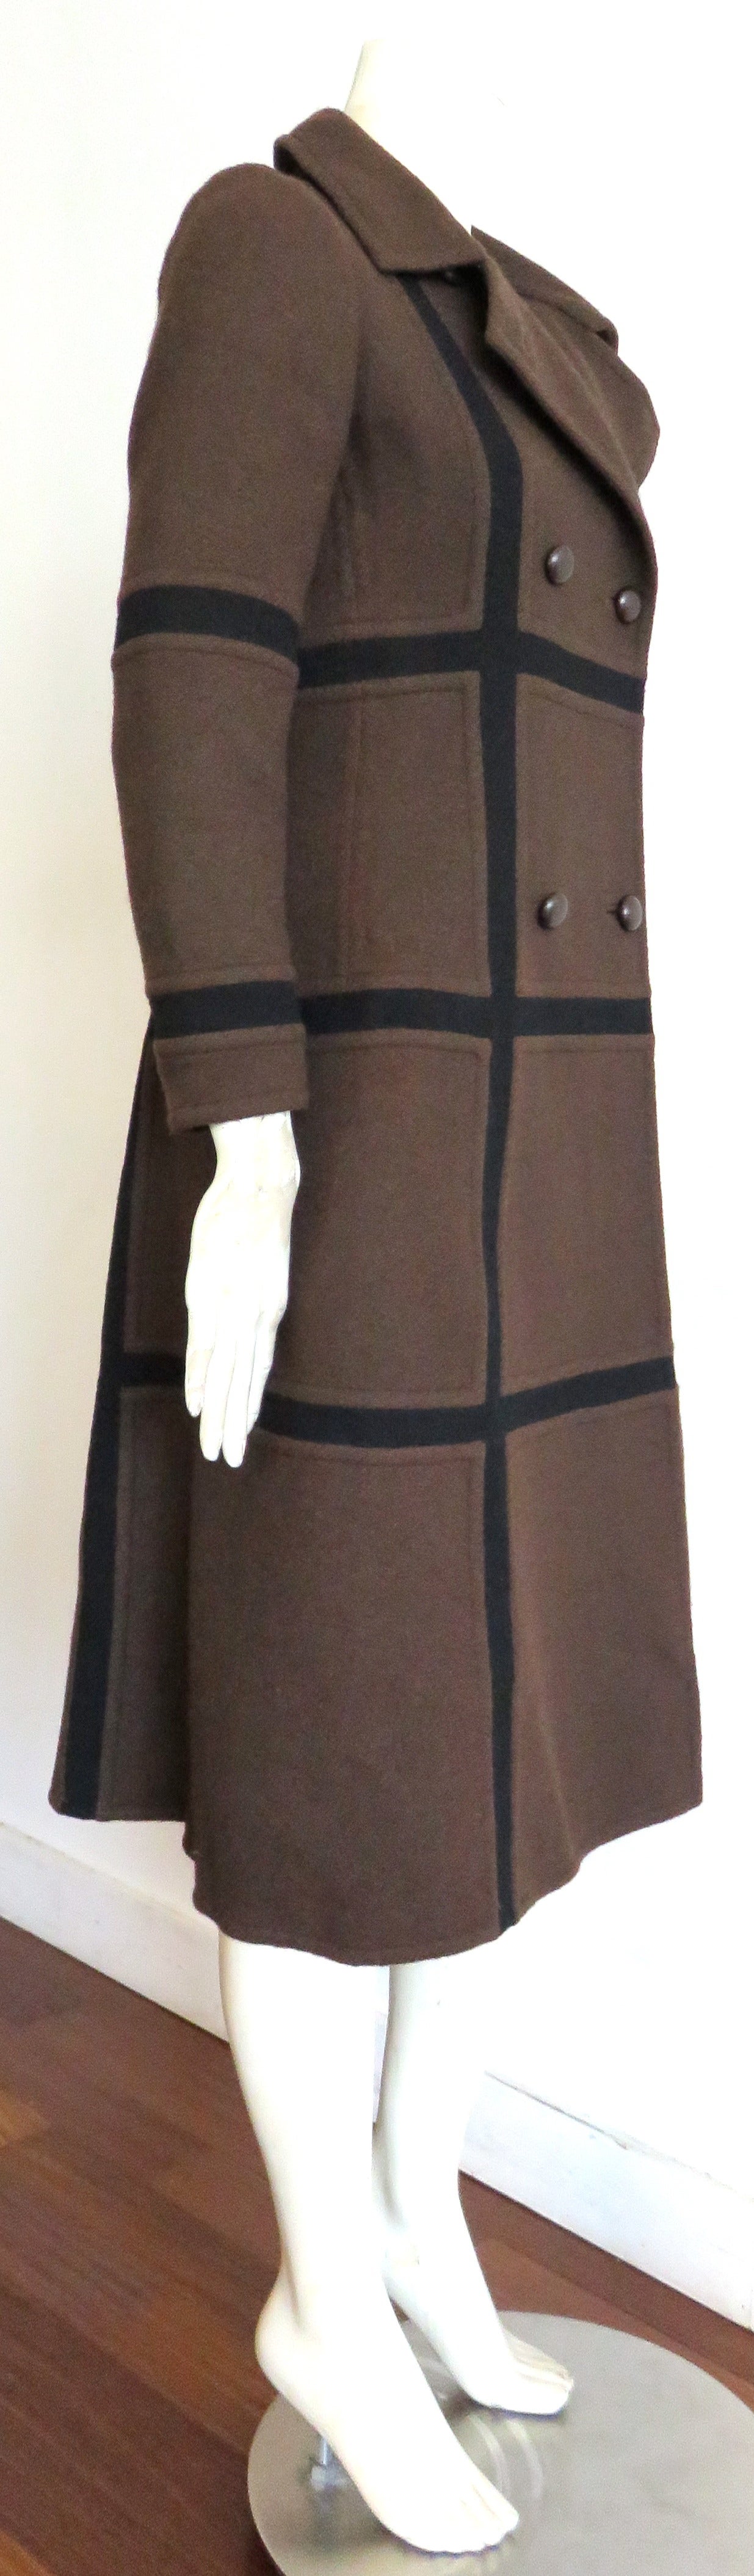 1970's GIVENCHY Haute Couture Wool paneled coat In Excellent Condition For Sale In Newport Beach, CA